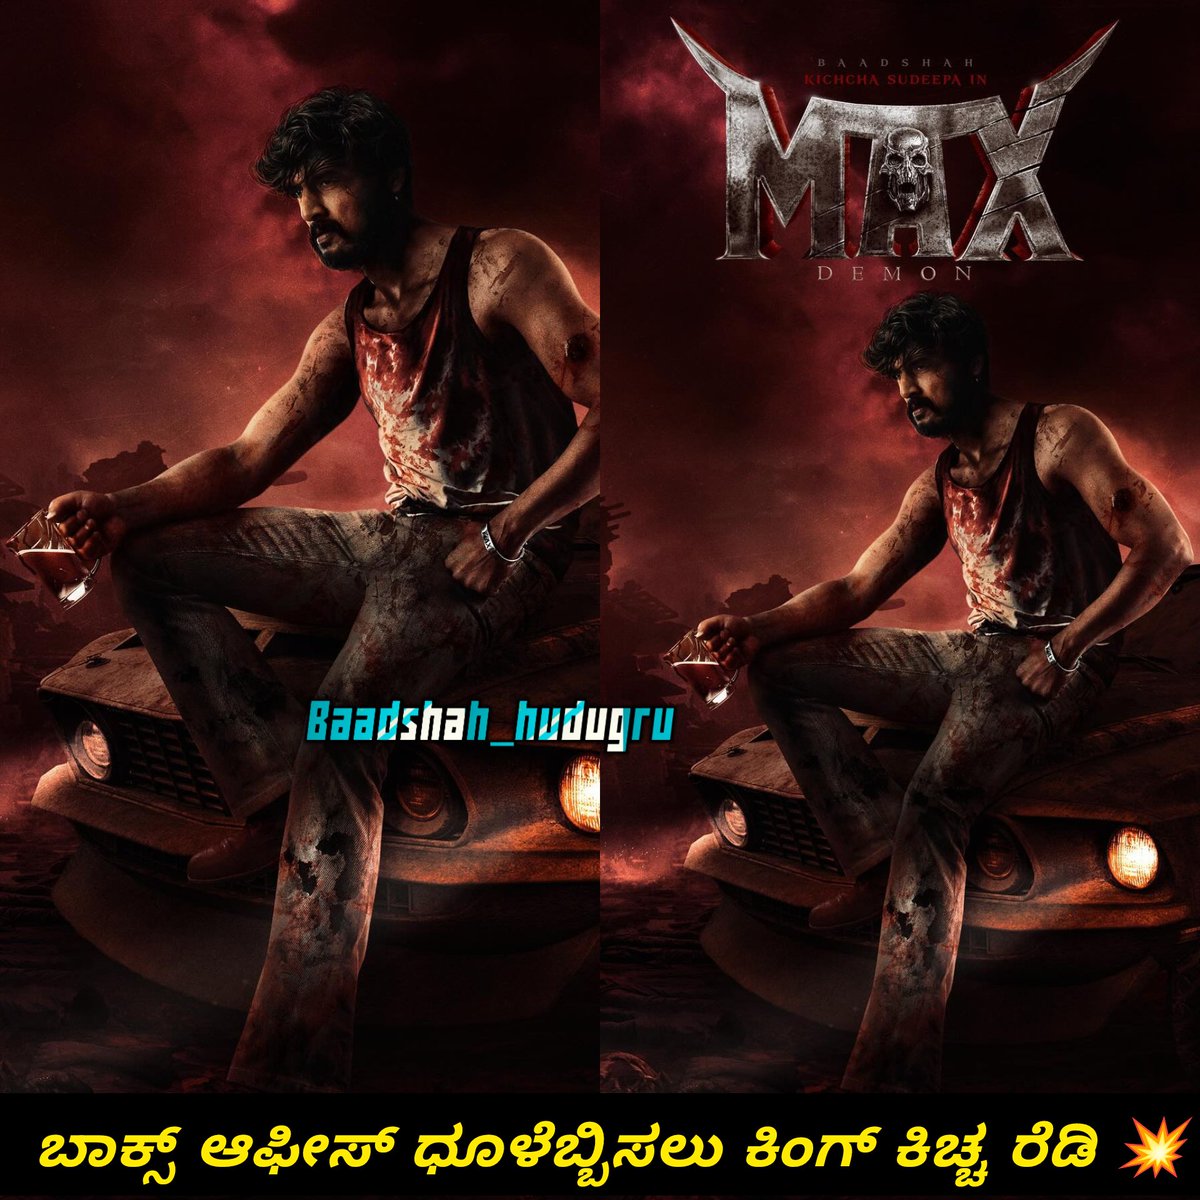 Accept or die ..,,, #KicchaBoss Fans Made posters >>>> @dasadarshan Movies official posters 🙏😂 This Max Poster >> flop Shaatera Movie posters🧐🫡 #maxupdates #maxthemovie @KicchaSudeep #KicchaSudeep